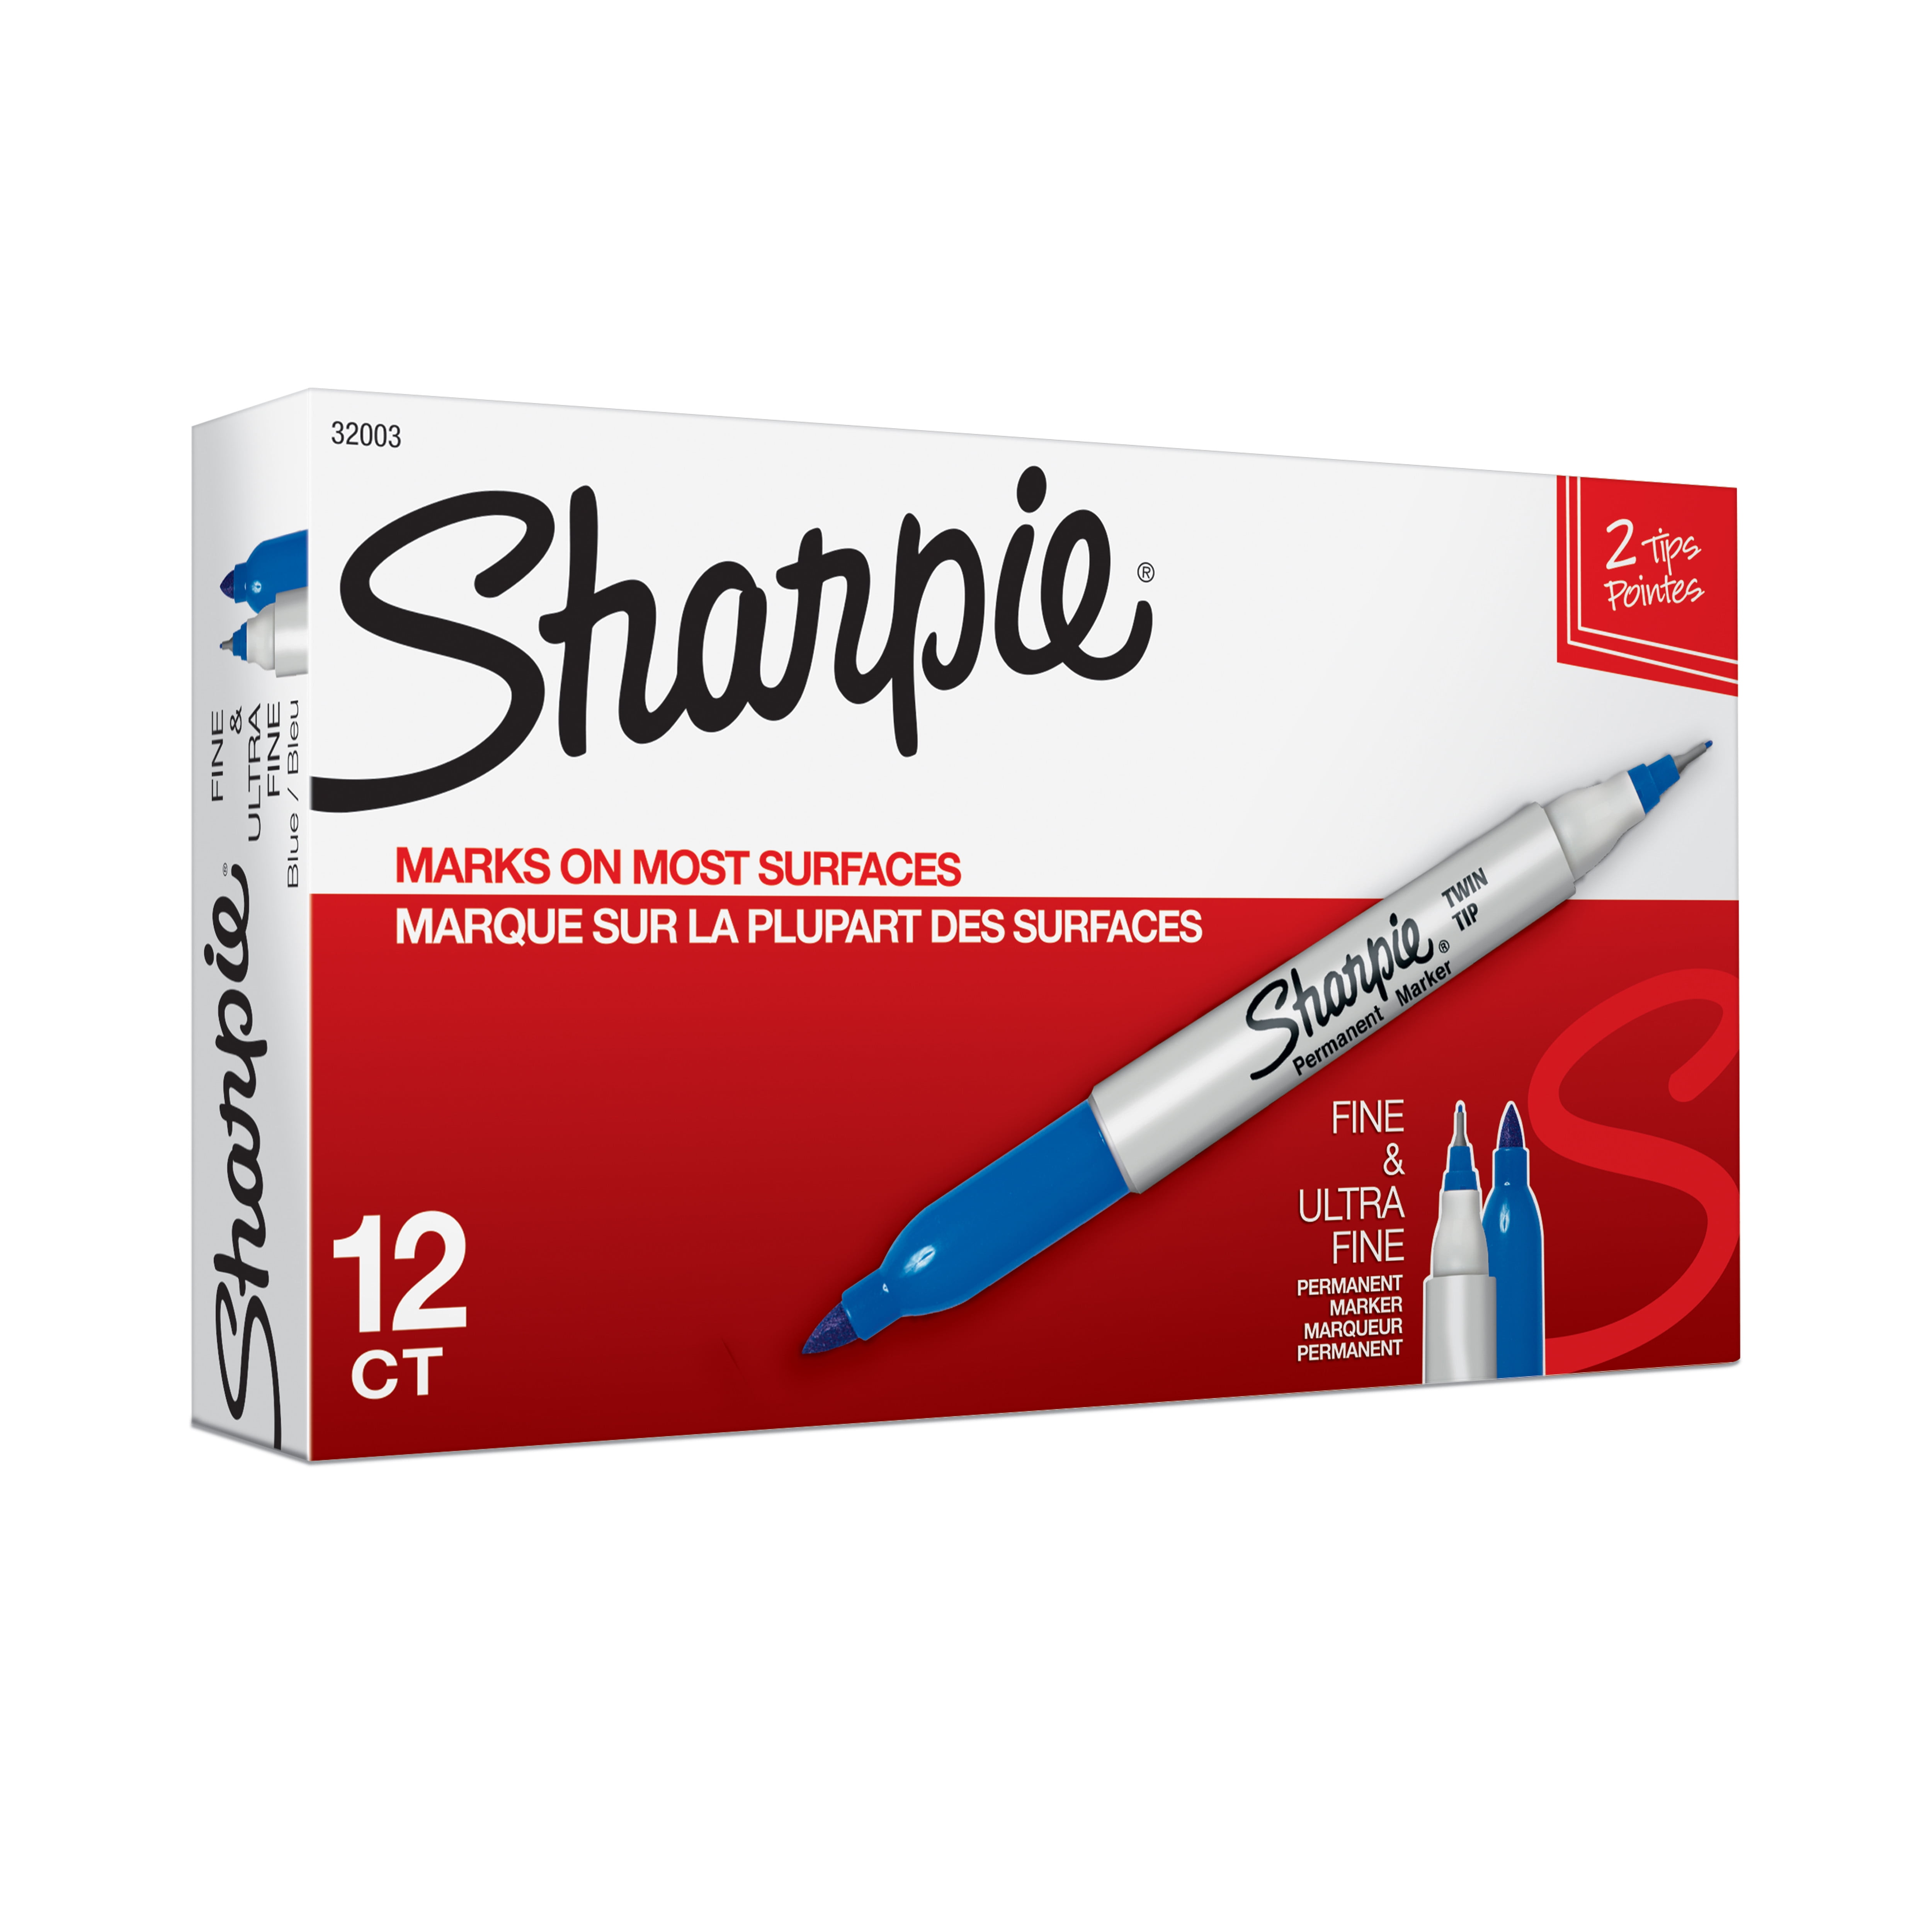 Twin-Tip Permanent Marker by Sharpie® SAN1783340